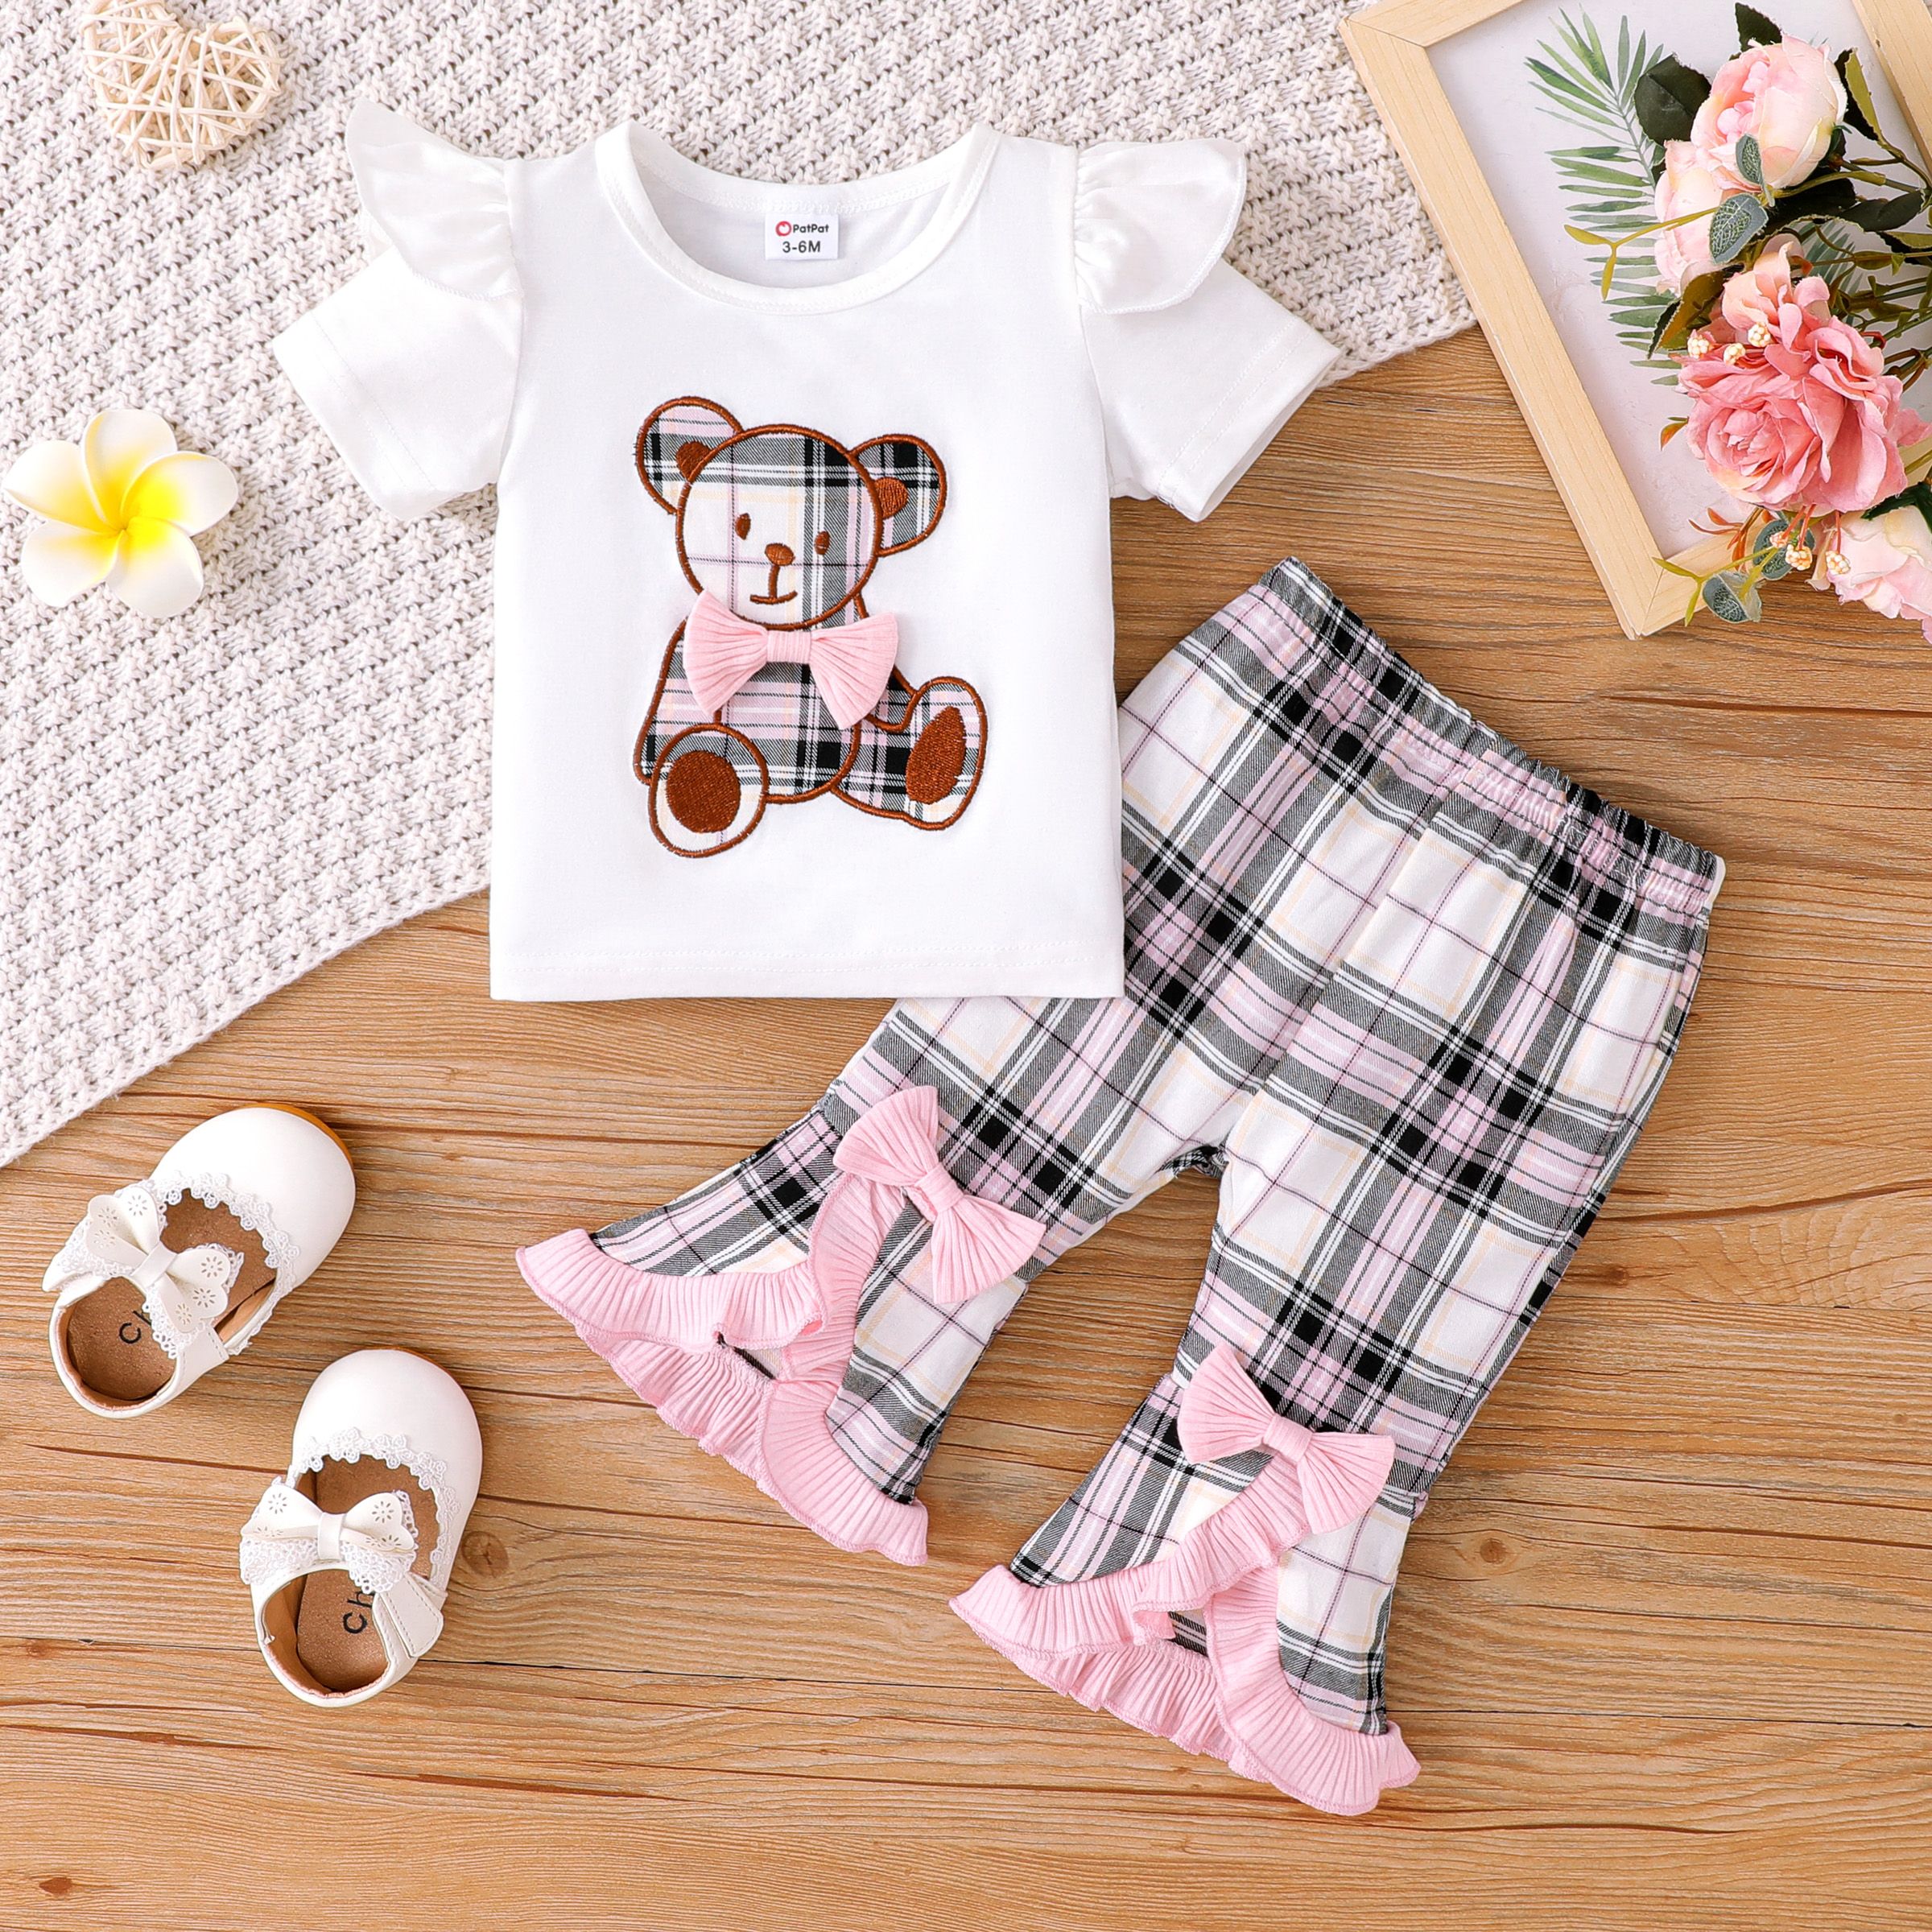 Sweet Girls' 2pcs Summer Cotton Set with Embroidered Bear and Ruffle Edge